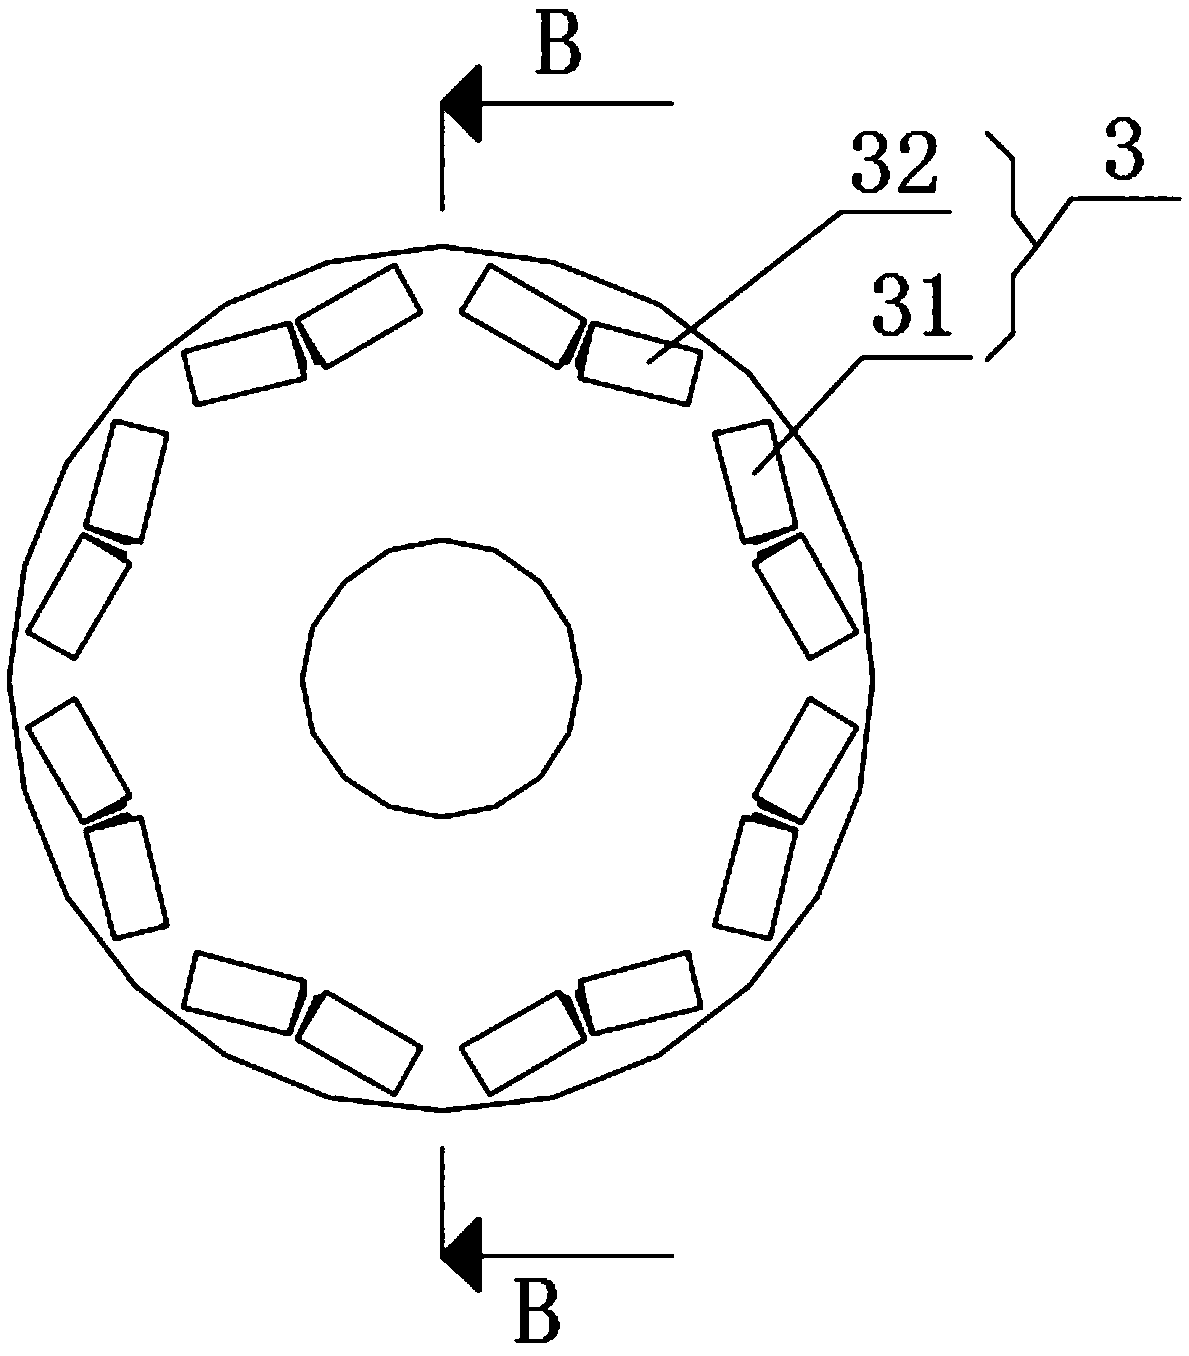 Rotor with automatic flux weakening structure and permanent magnet motor